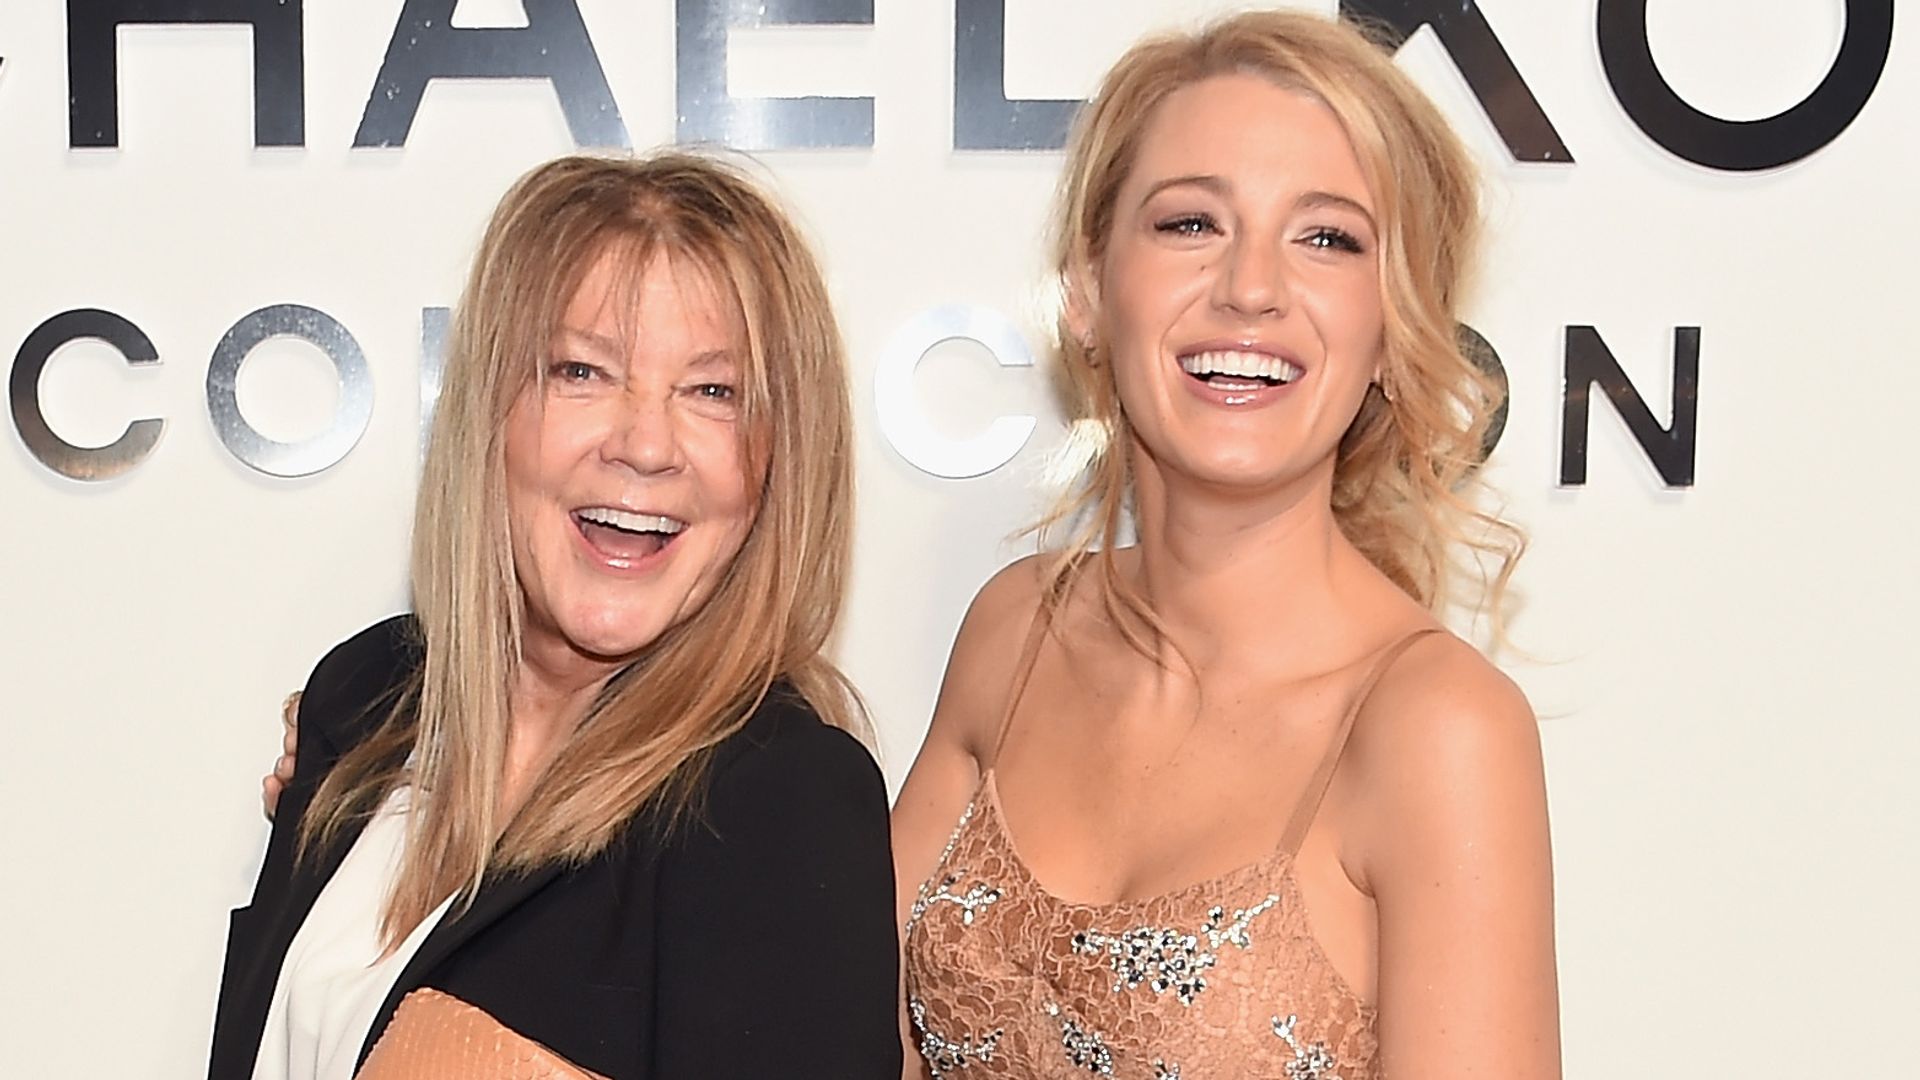 Actresses Elaine Lively (L) and Blake Lively pose backstage at the Michael Kors Fall 2016 Runway Show during New York Fashion Week